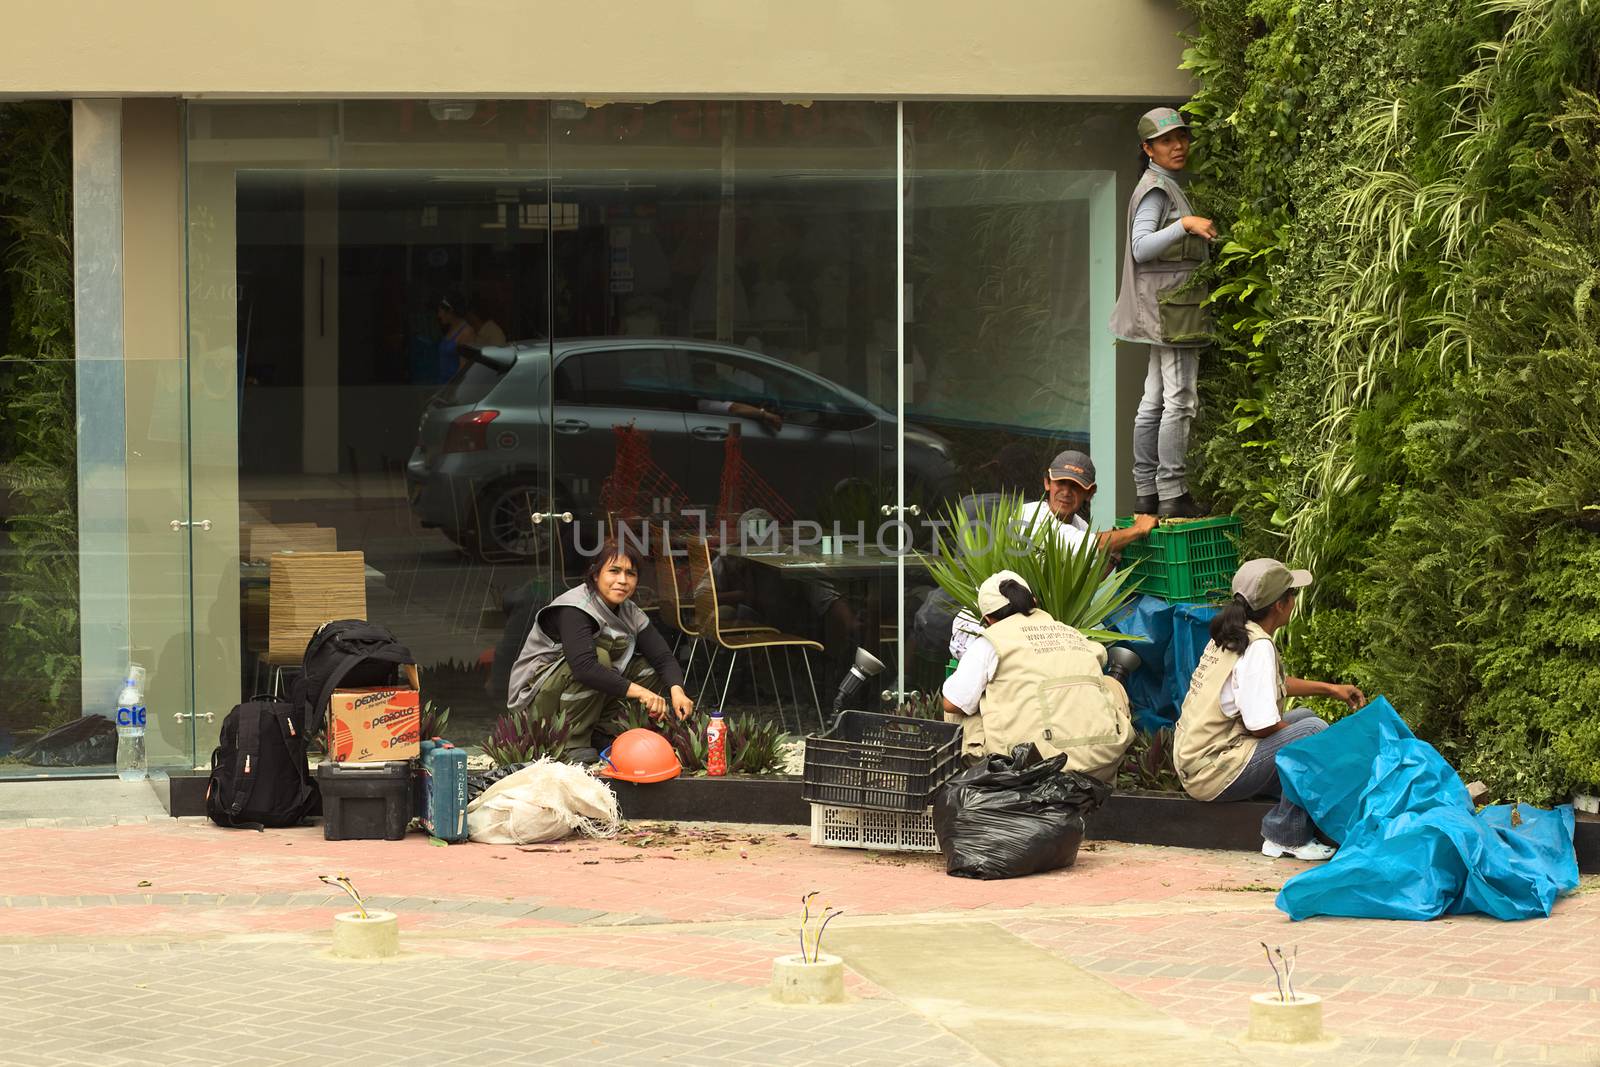 LIMA, PERU - FEBRUARY 11, 2012: Unidentified people arranging a green area in front of a building on February 11, 2012 in Miraflores, Lima, Peru. 